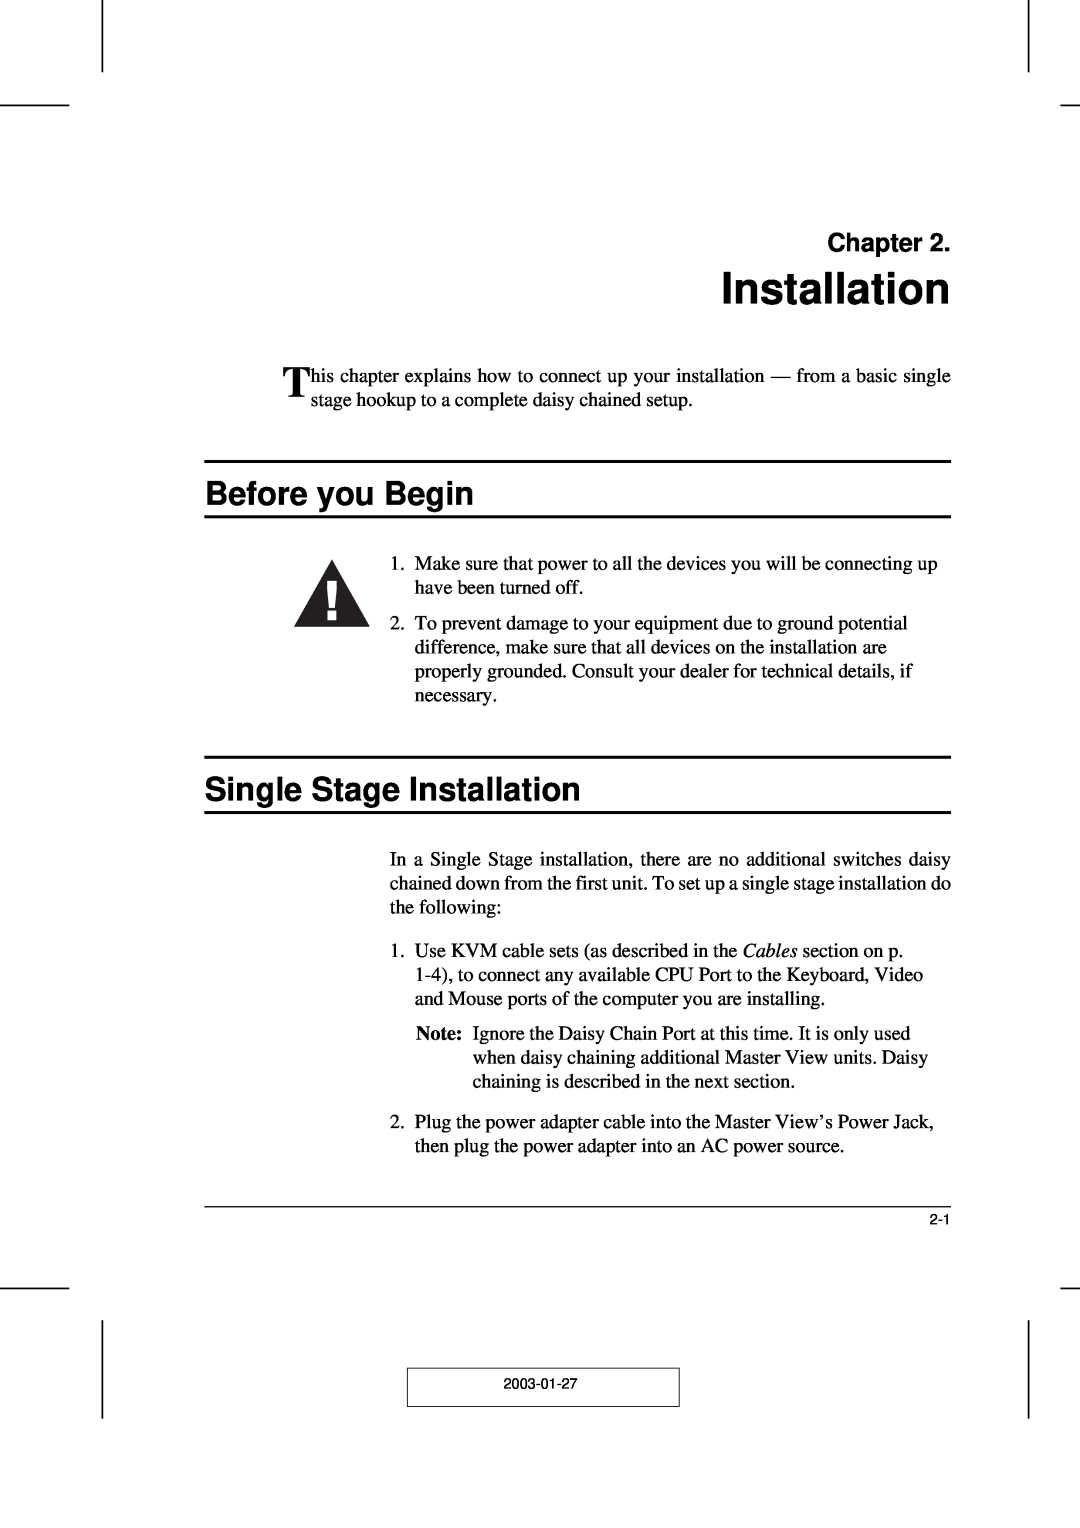 ATEN Technology ACS-1208AL, ACS-1216AL user manual Before you Begin, Single Stage Installation, Chapter 